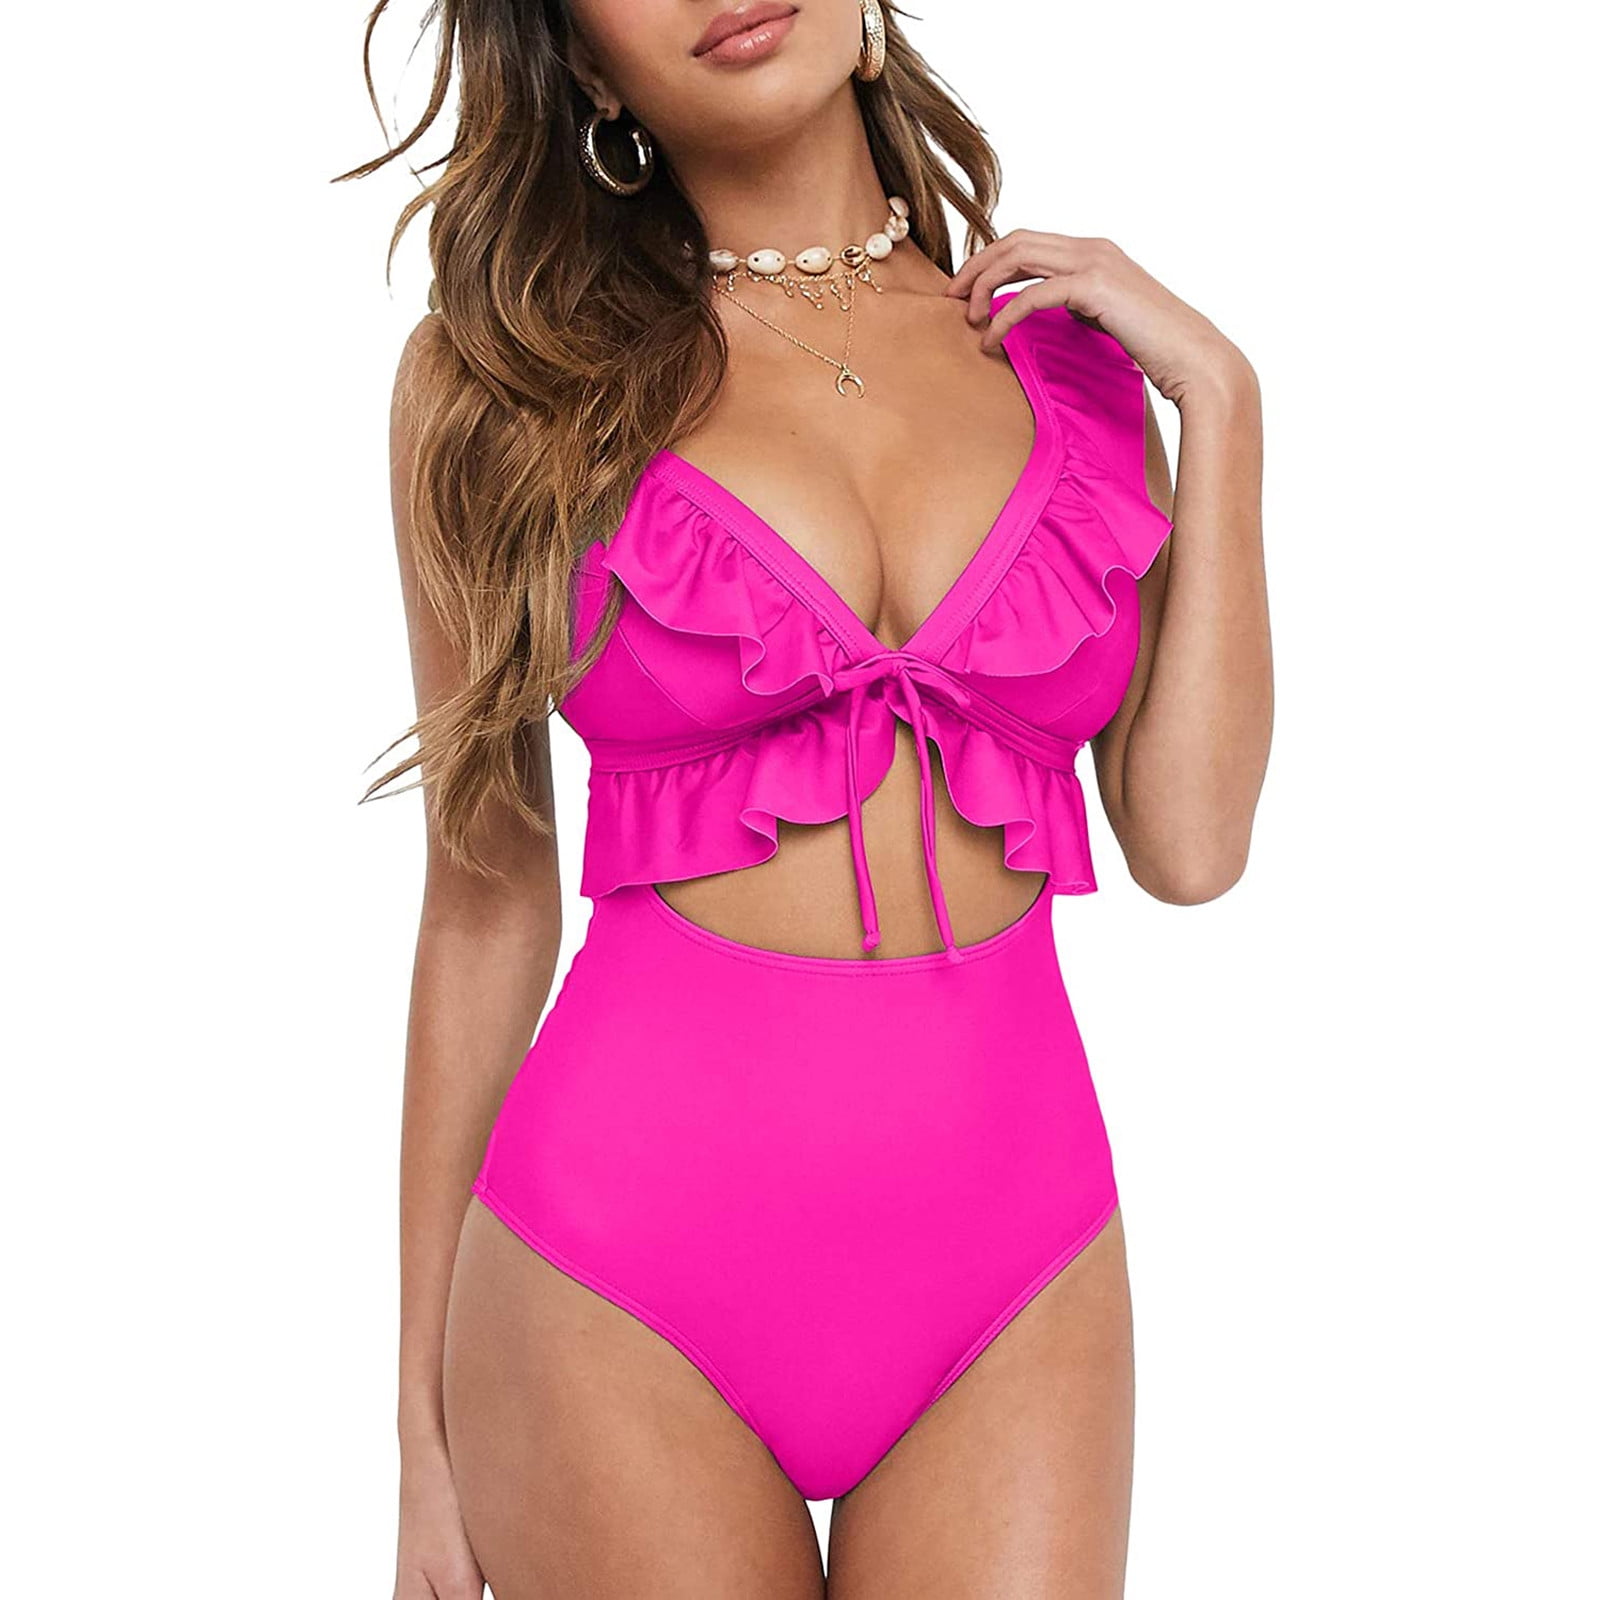 Mchoice Women's Two-Piece High Waisted Swimsuits Hot Pink Bikini Swimsuits  Sexy Filled Bra Bathing Suits Beachwear on Clearance